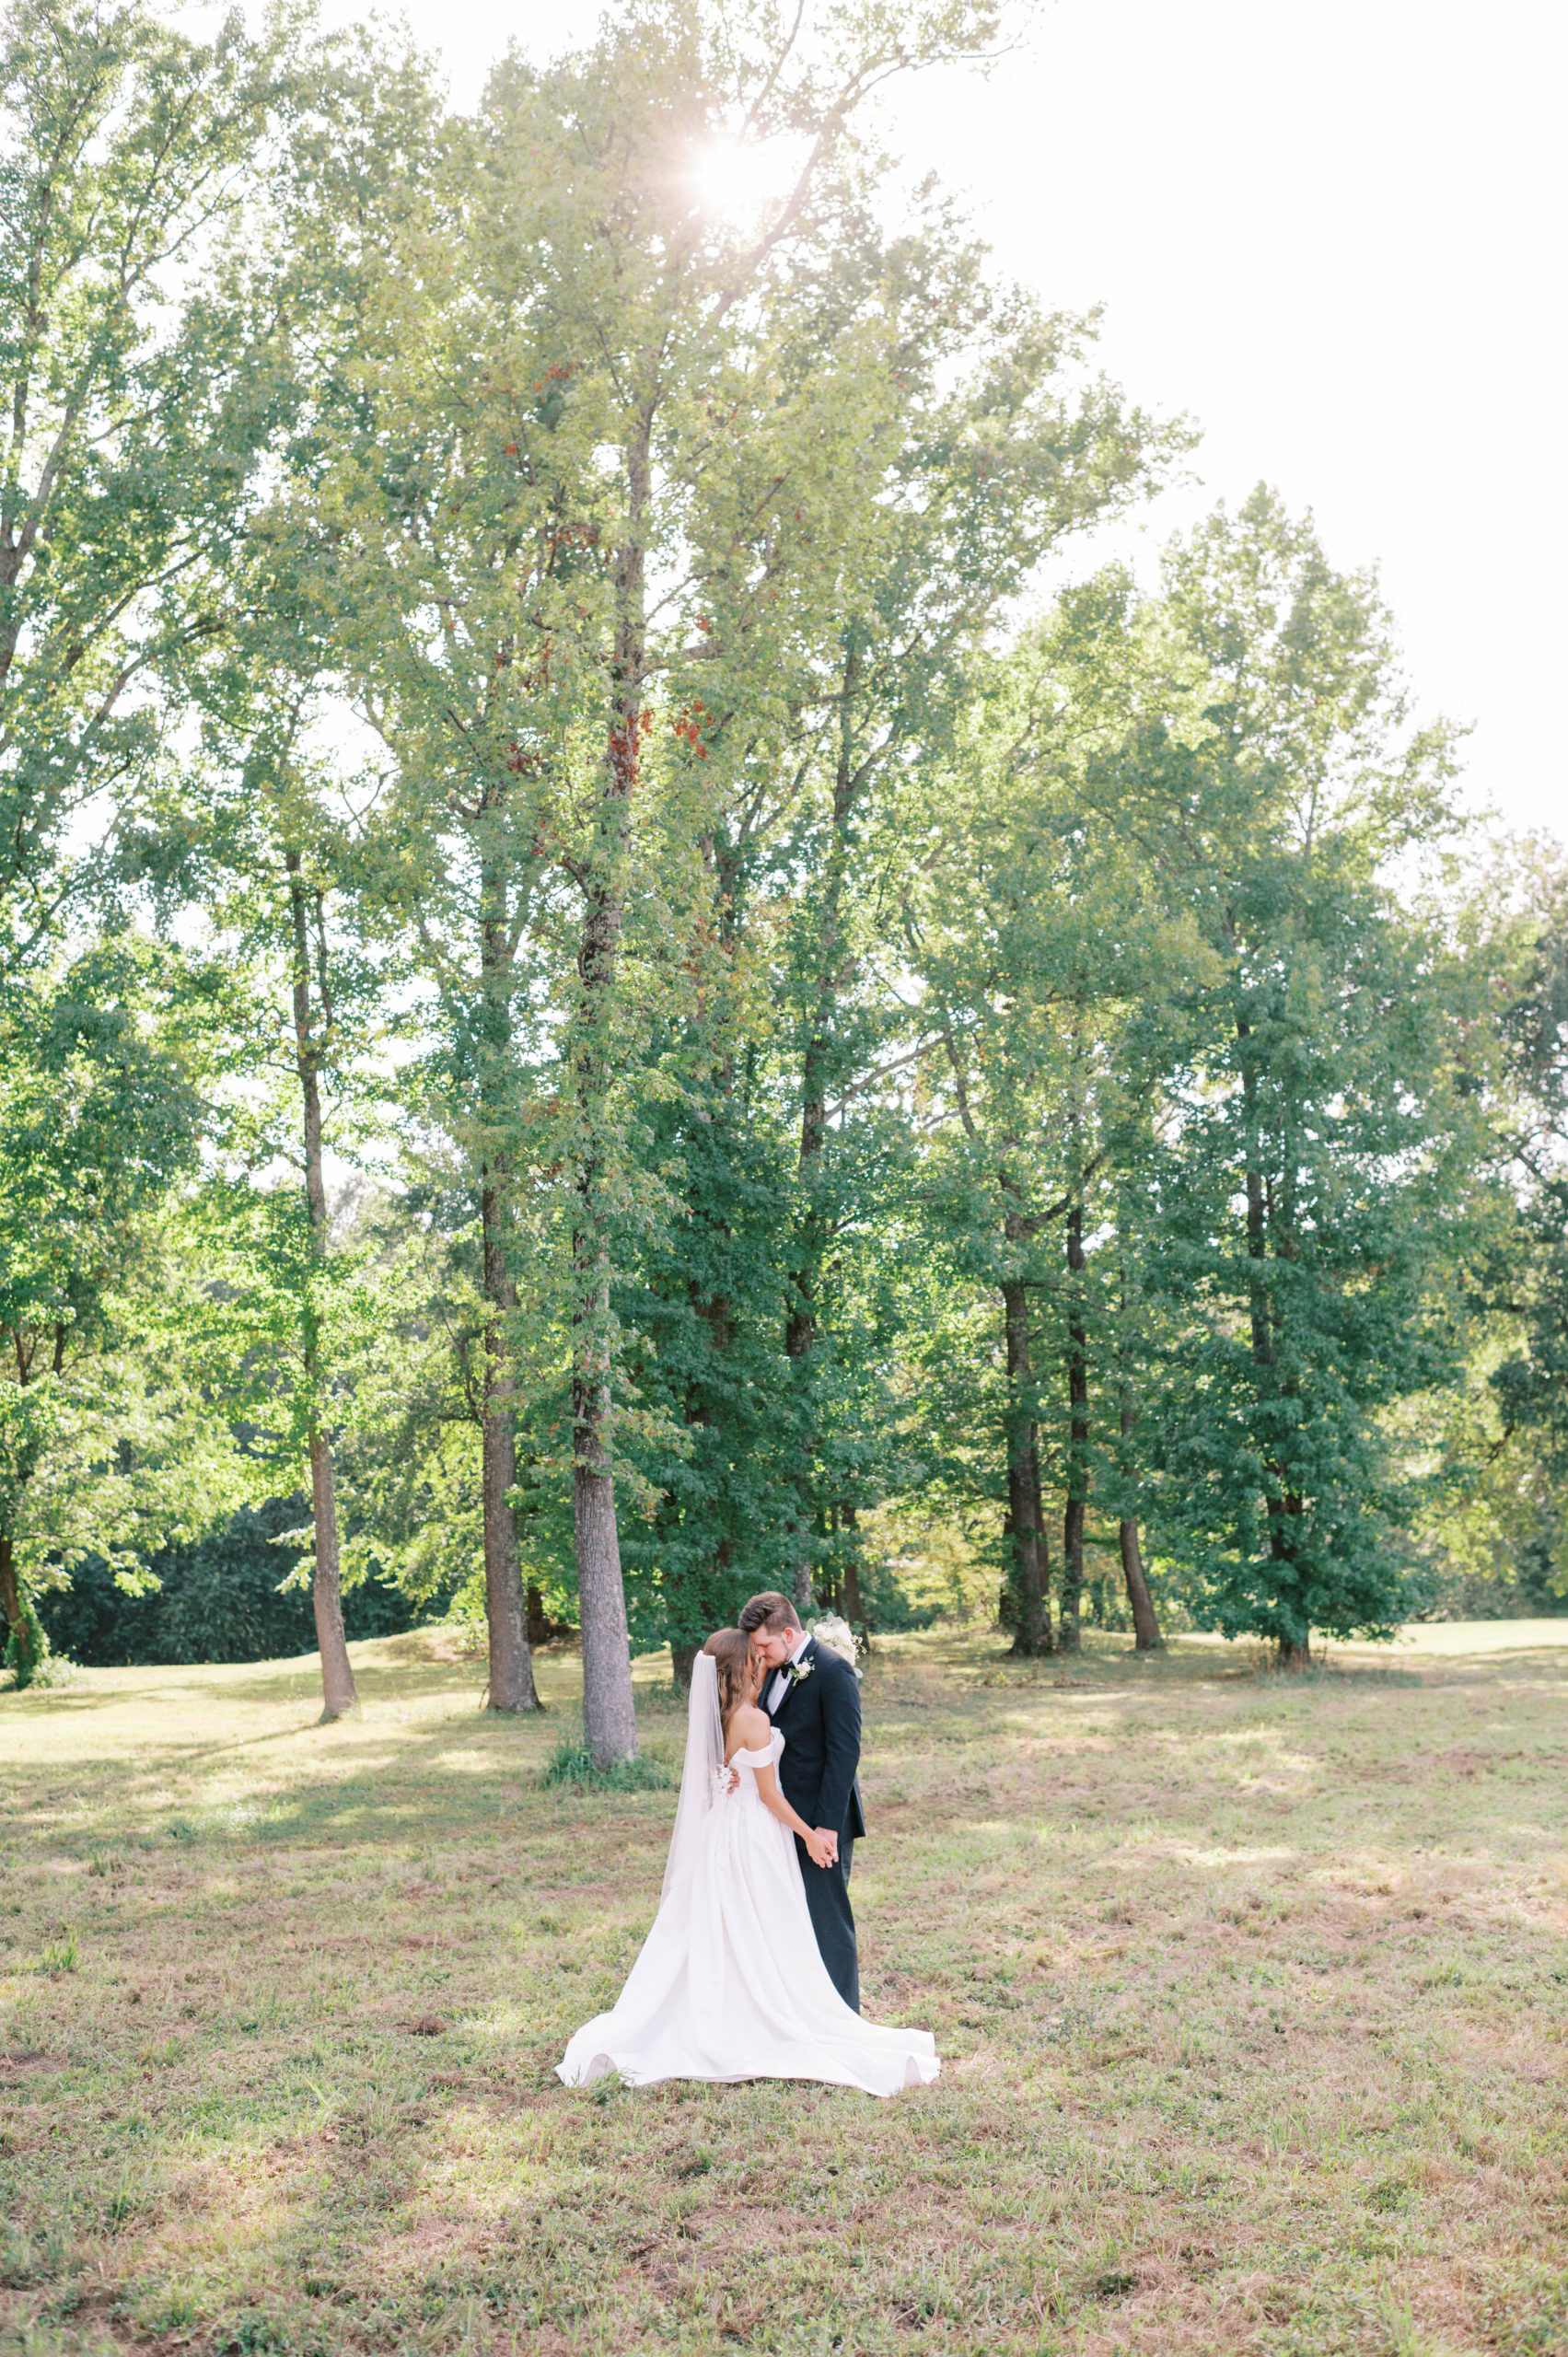 bride and groom standing in a grassy forest, facing each other and cuddling together.